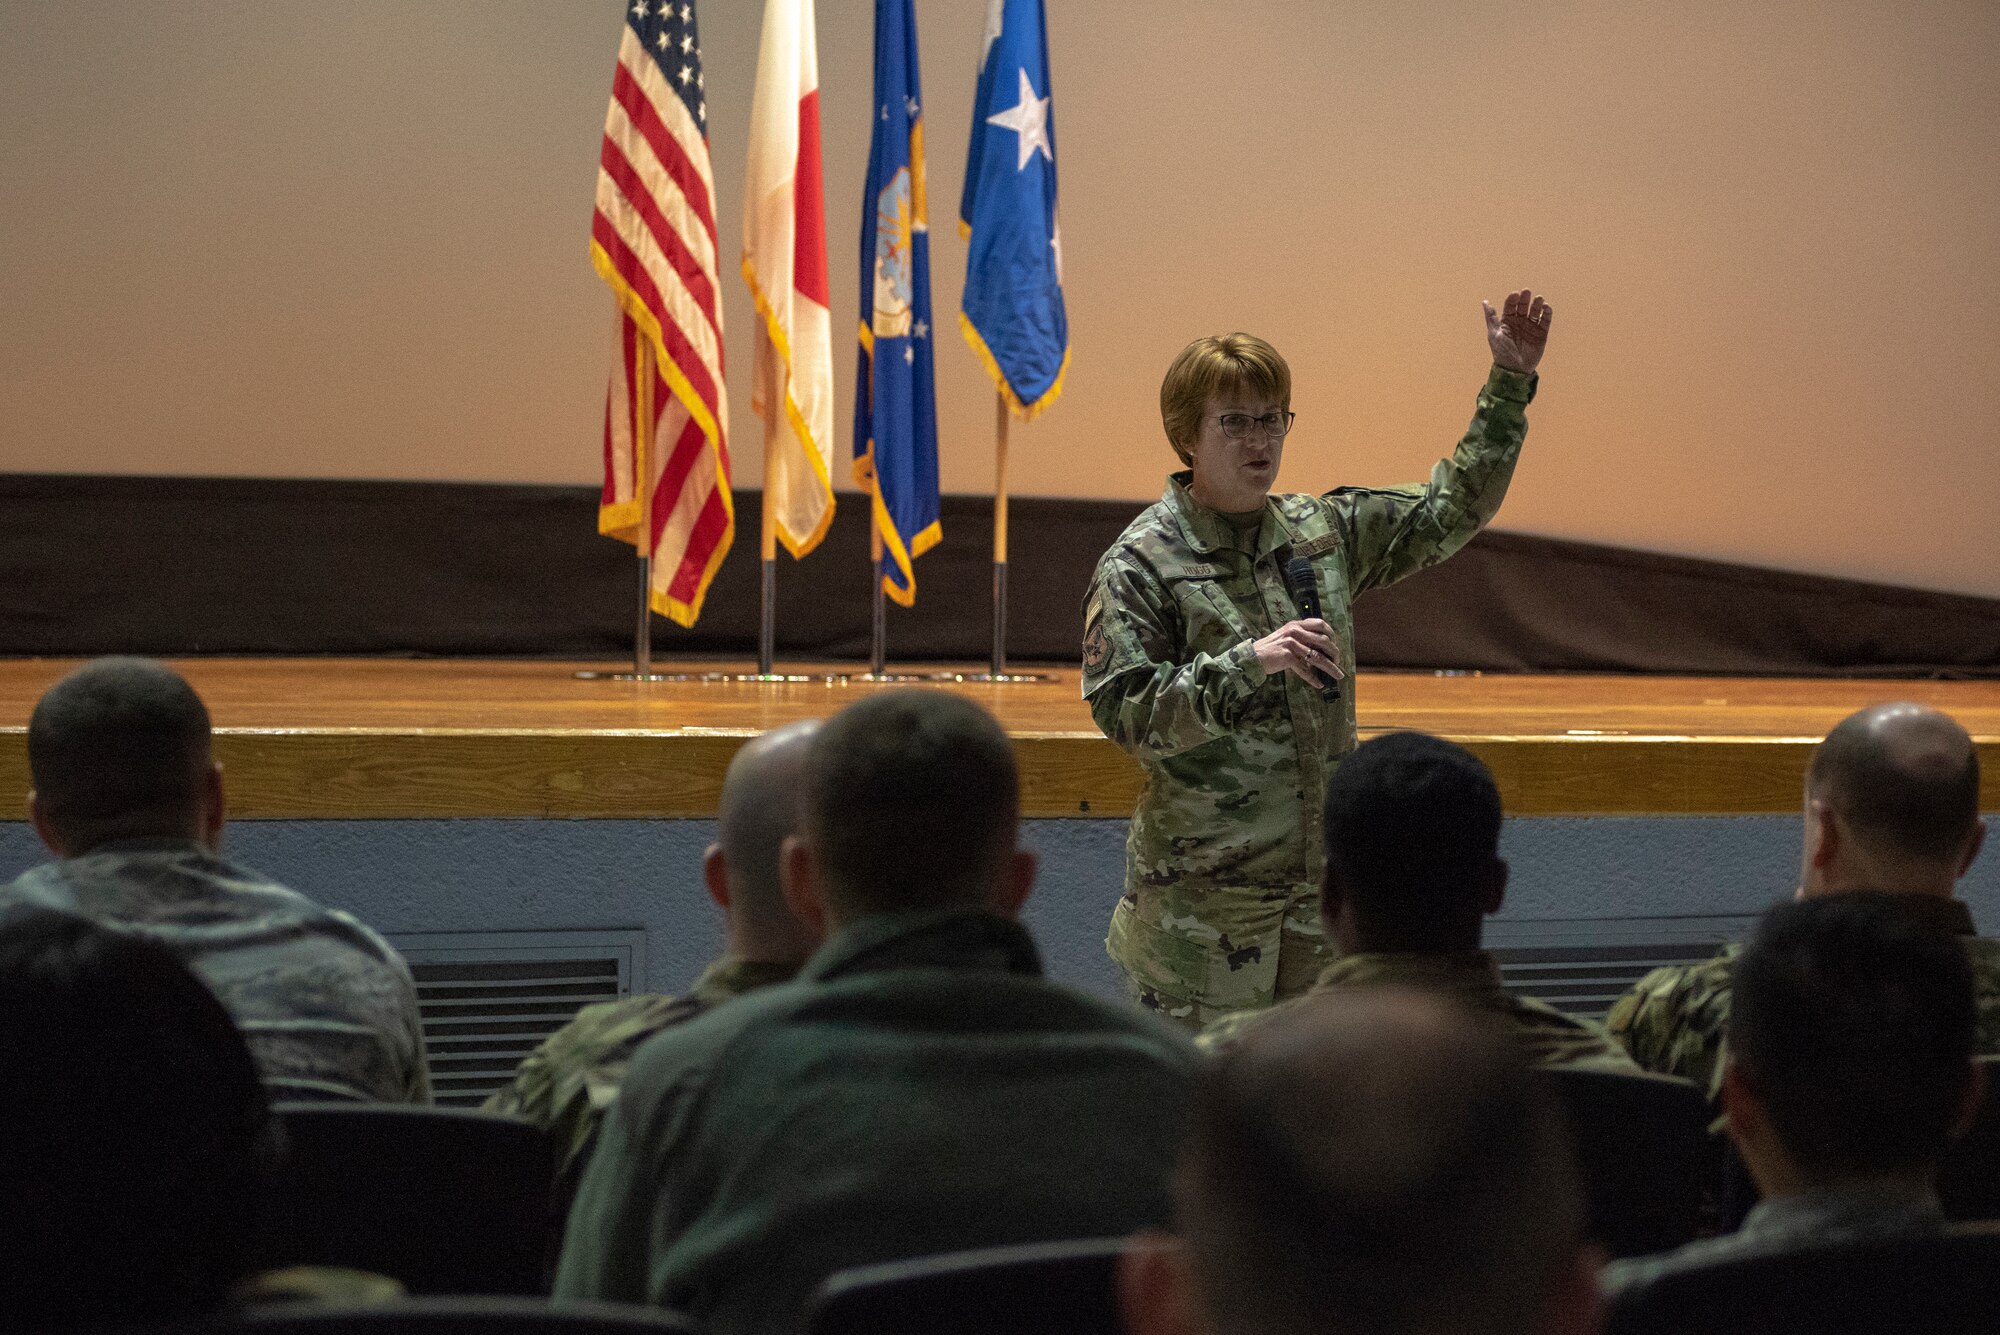 Lt. Gen. Dorothy Hogg, 23rd U.S. Air Force Surgeon General, discusses the importance of medical readiness and innovation with the 374th Medical Group during an all call at Yokota Air Base, Japan, Jan 29, 2019.